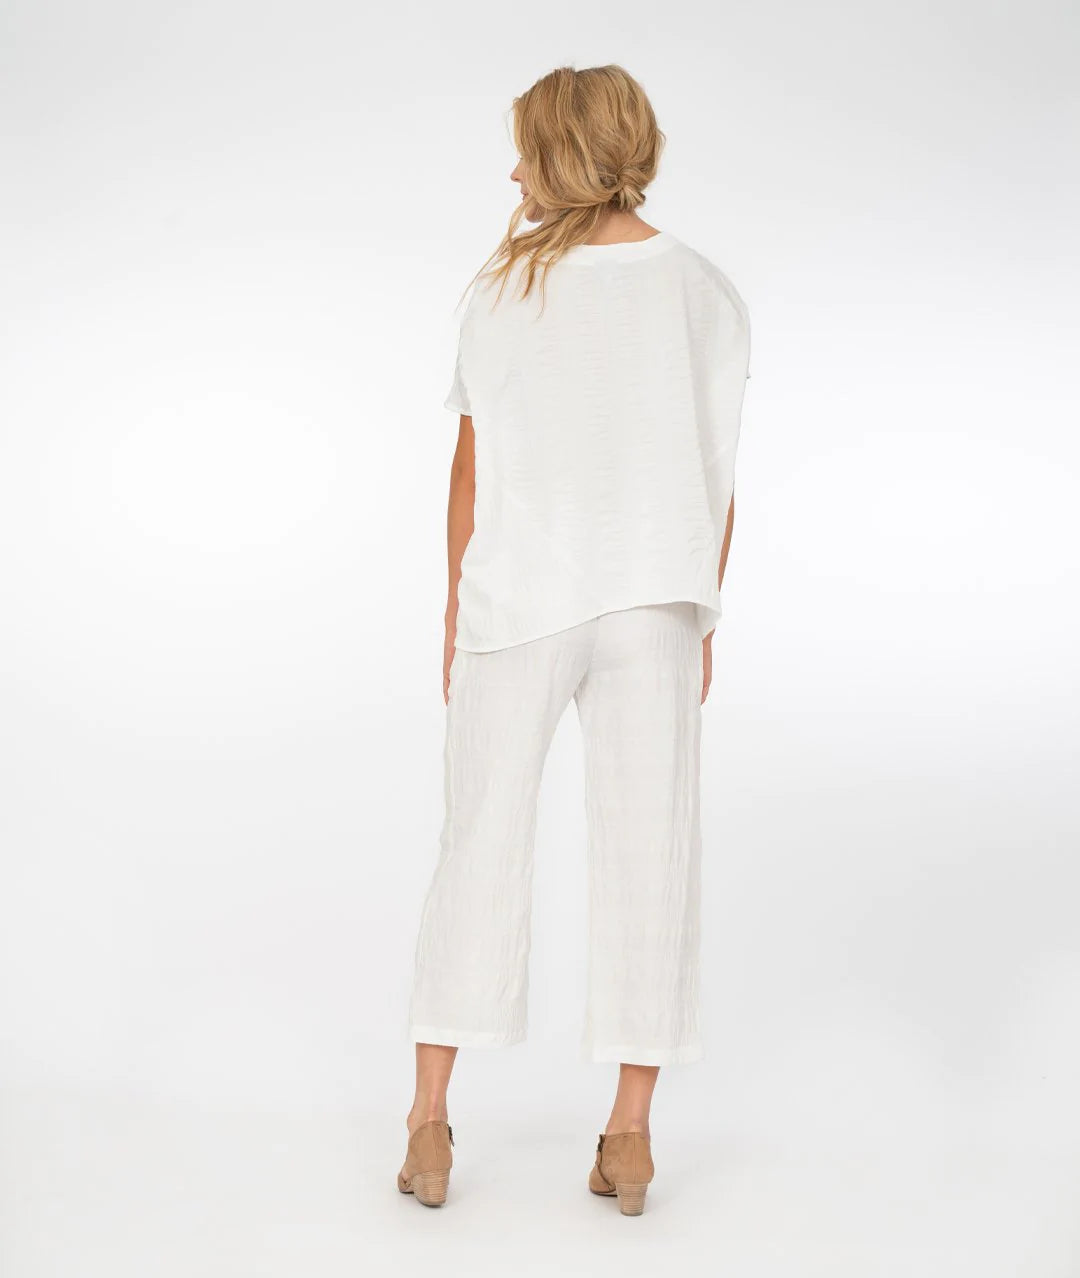 a model wearing white pants and a white boxy v-neck top in front of a white background